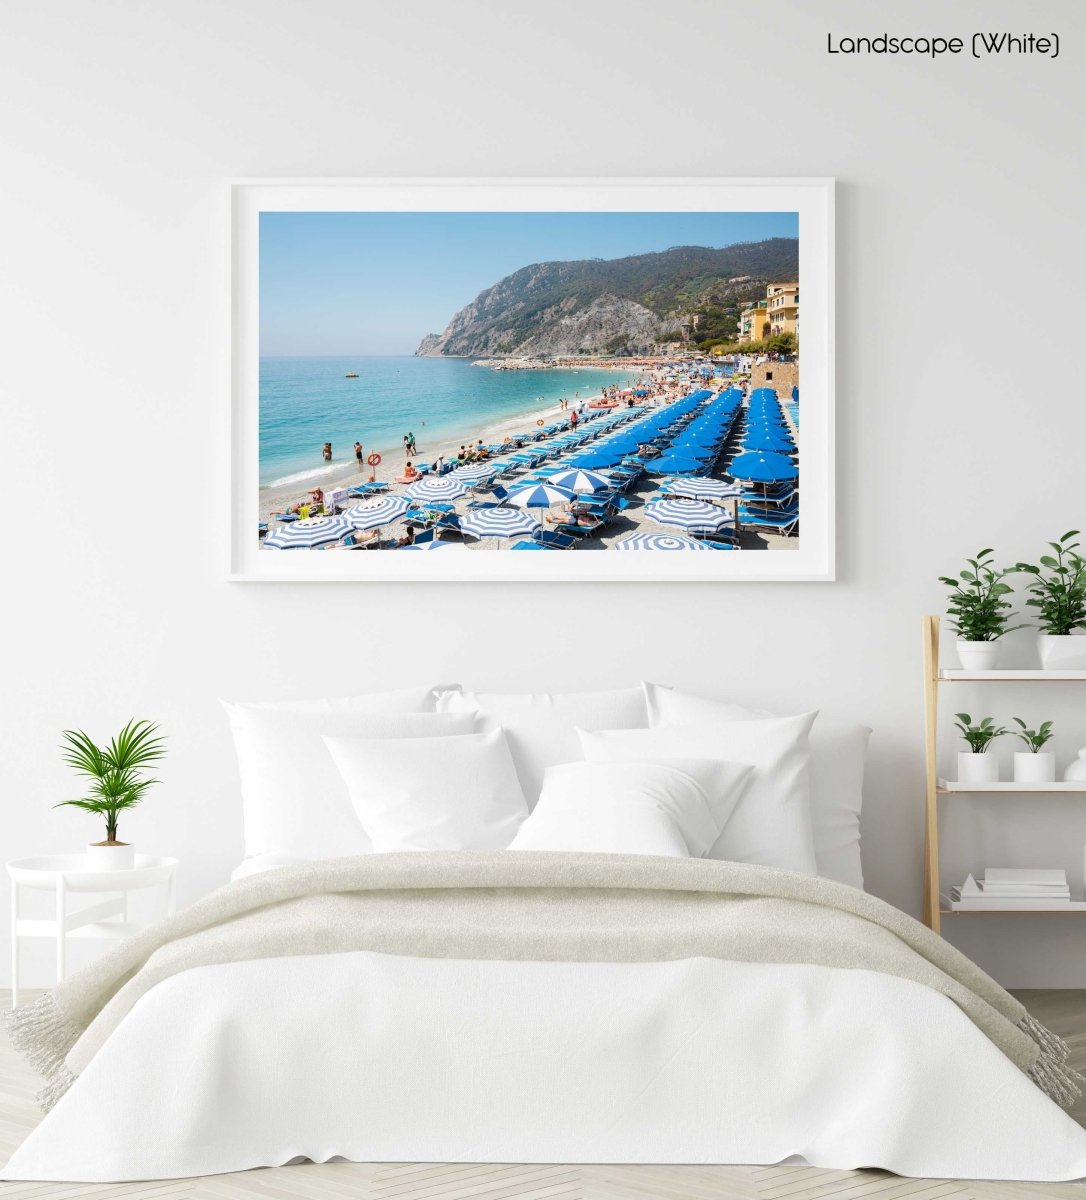 People and umbrellas at Monterosso beach Cinque Terre during summer in a white fine art frame